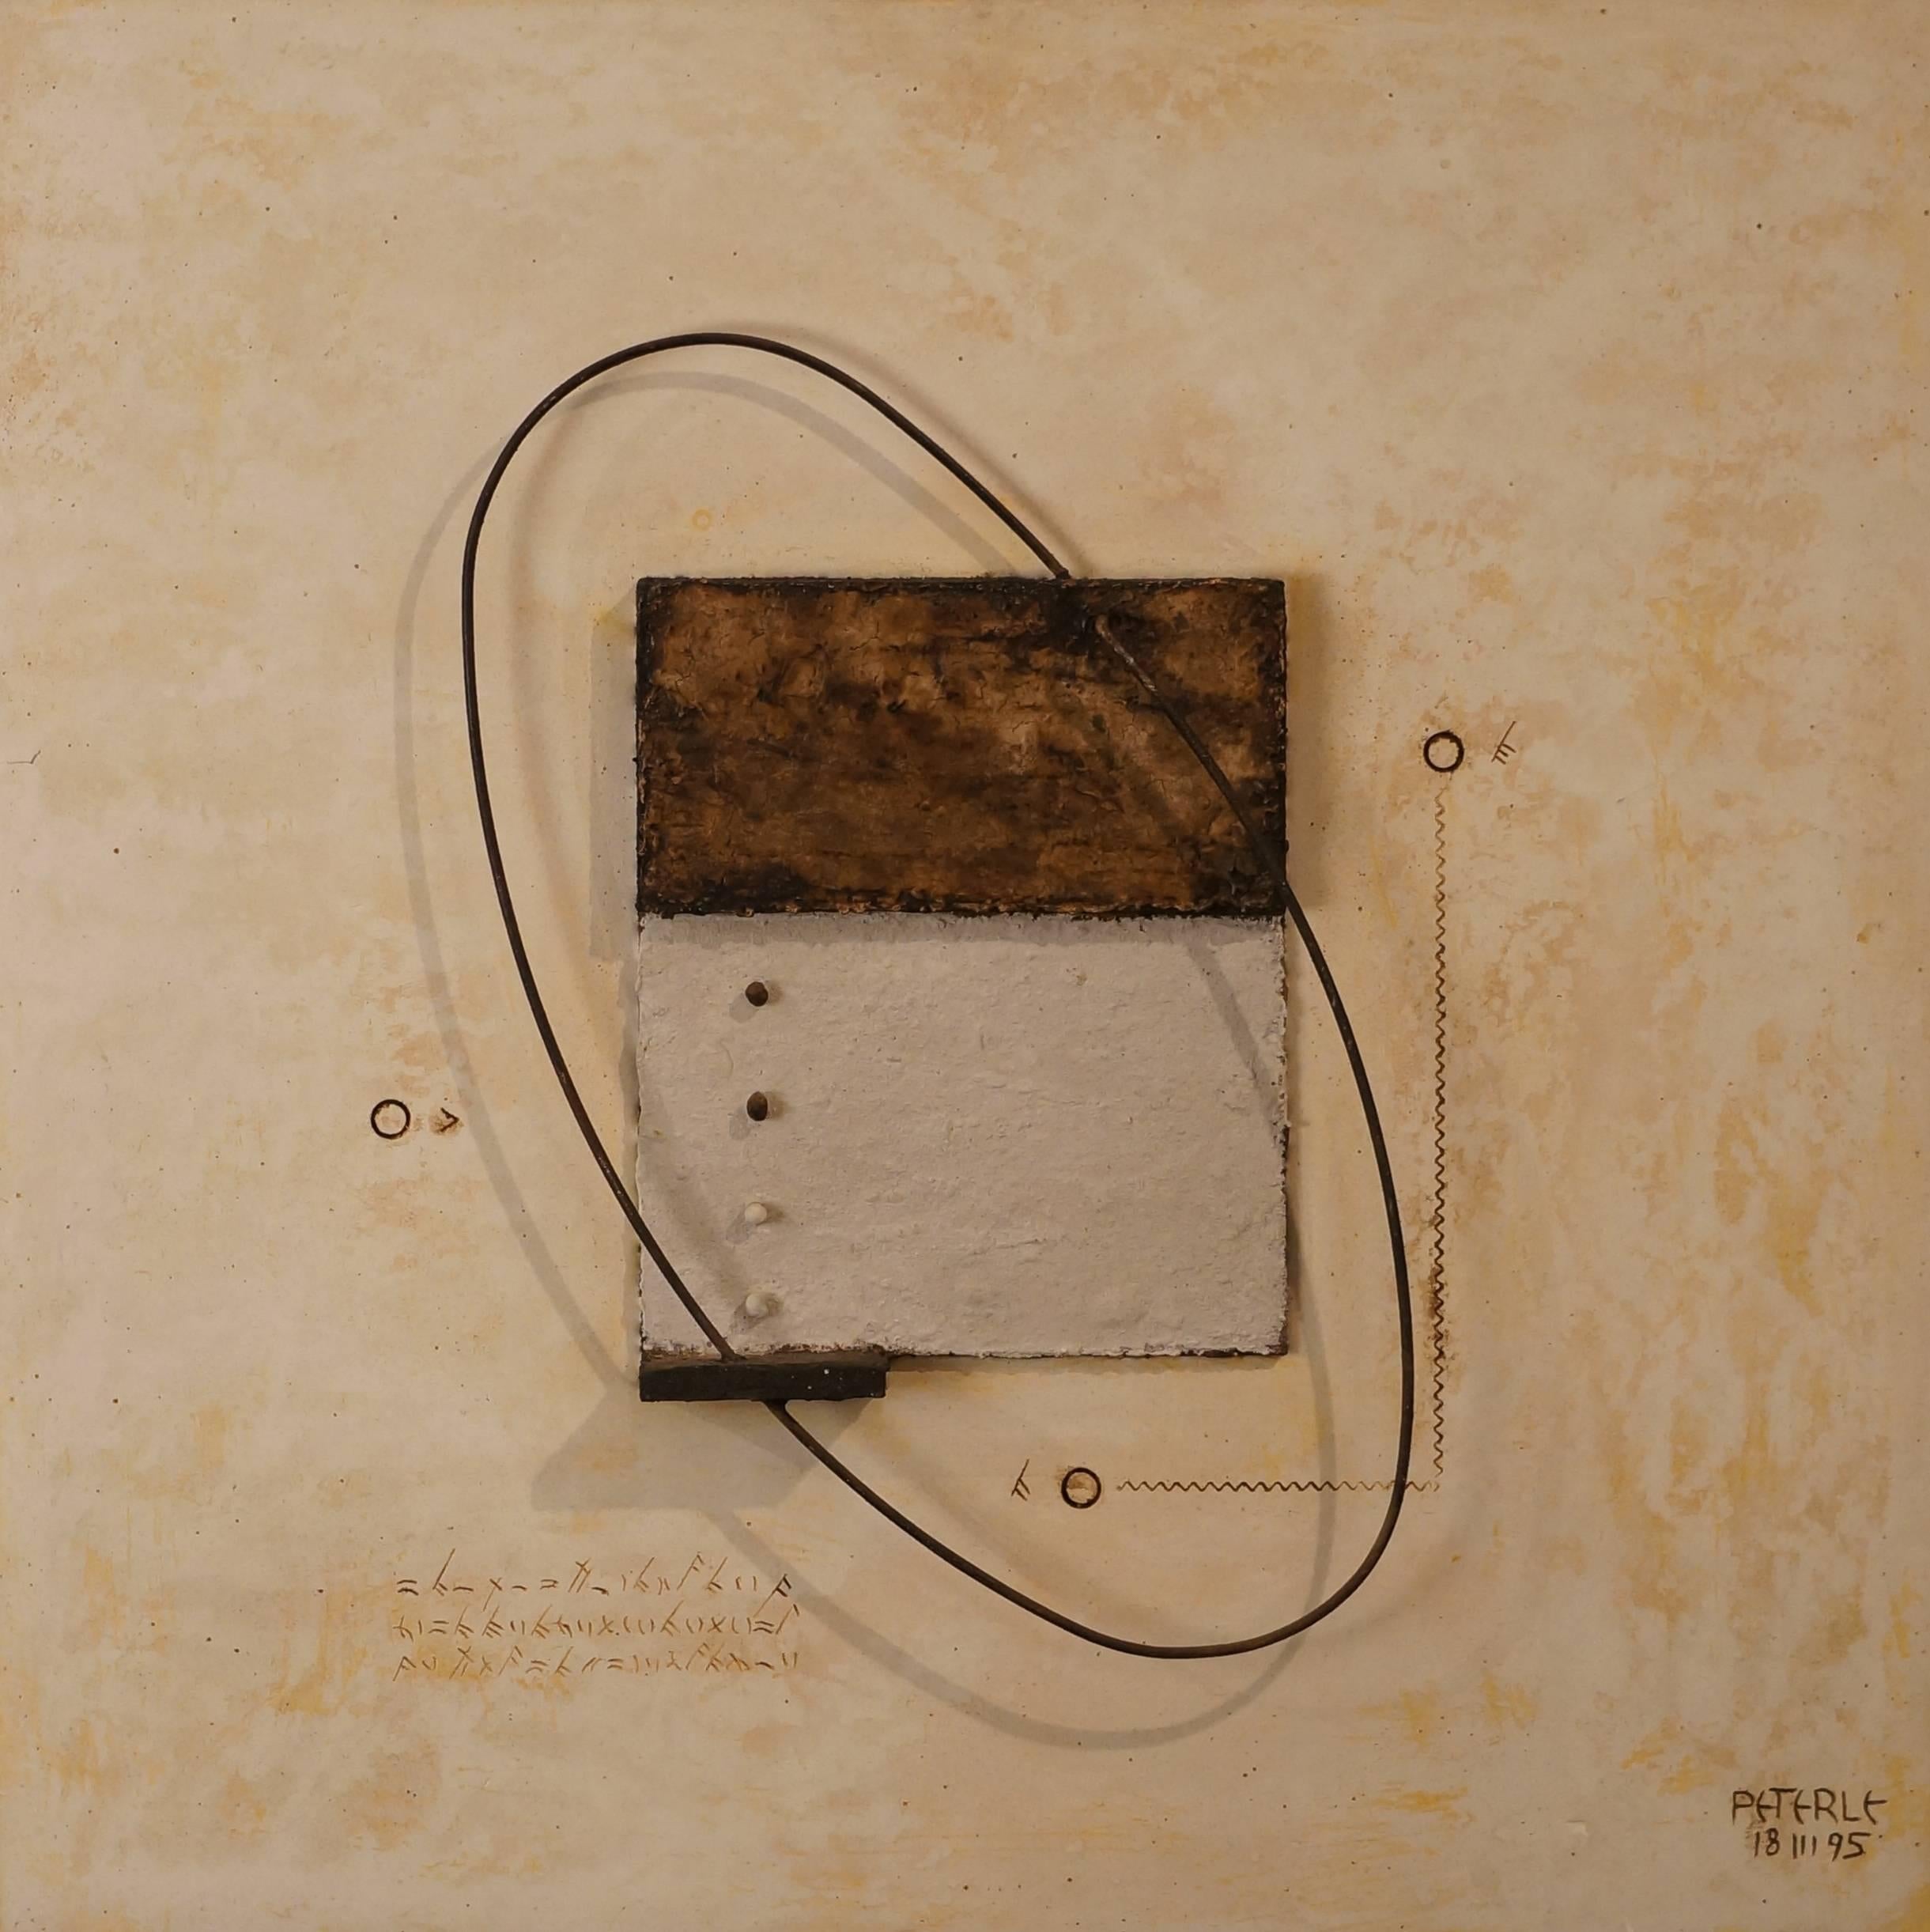 Abstract Composition VM, 1995 - mixed media, 65x65 cm, framed - Mixed Media Art by Paolo Peterlé